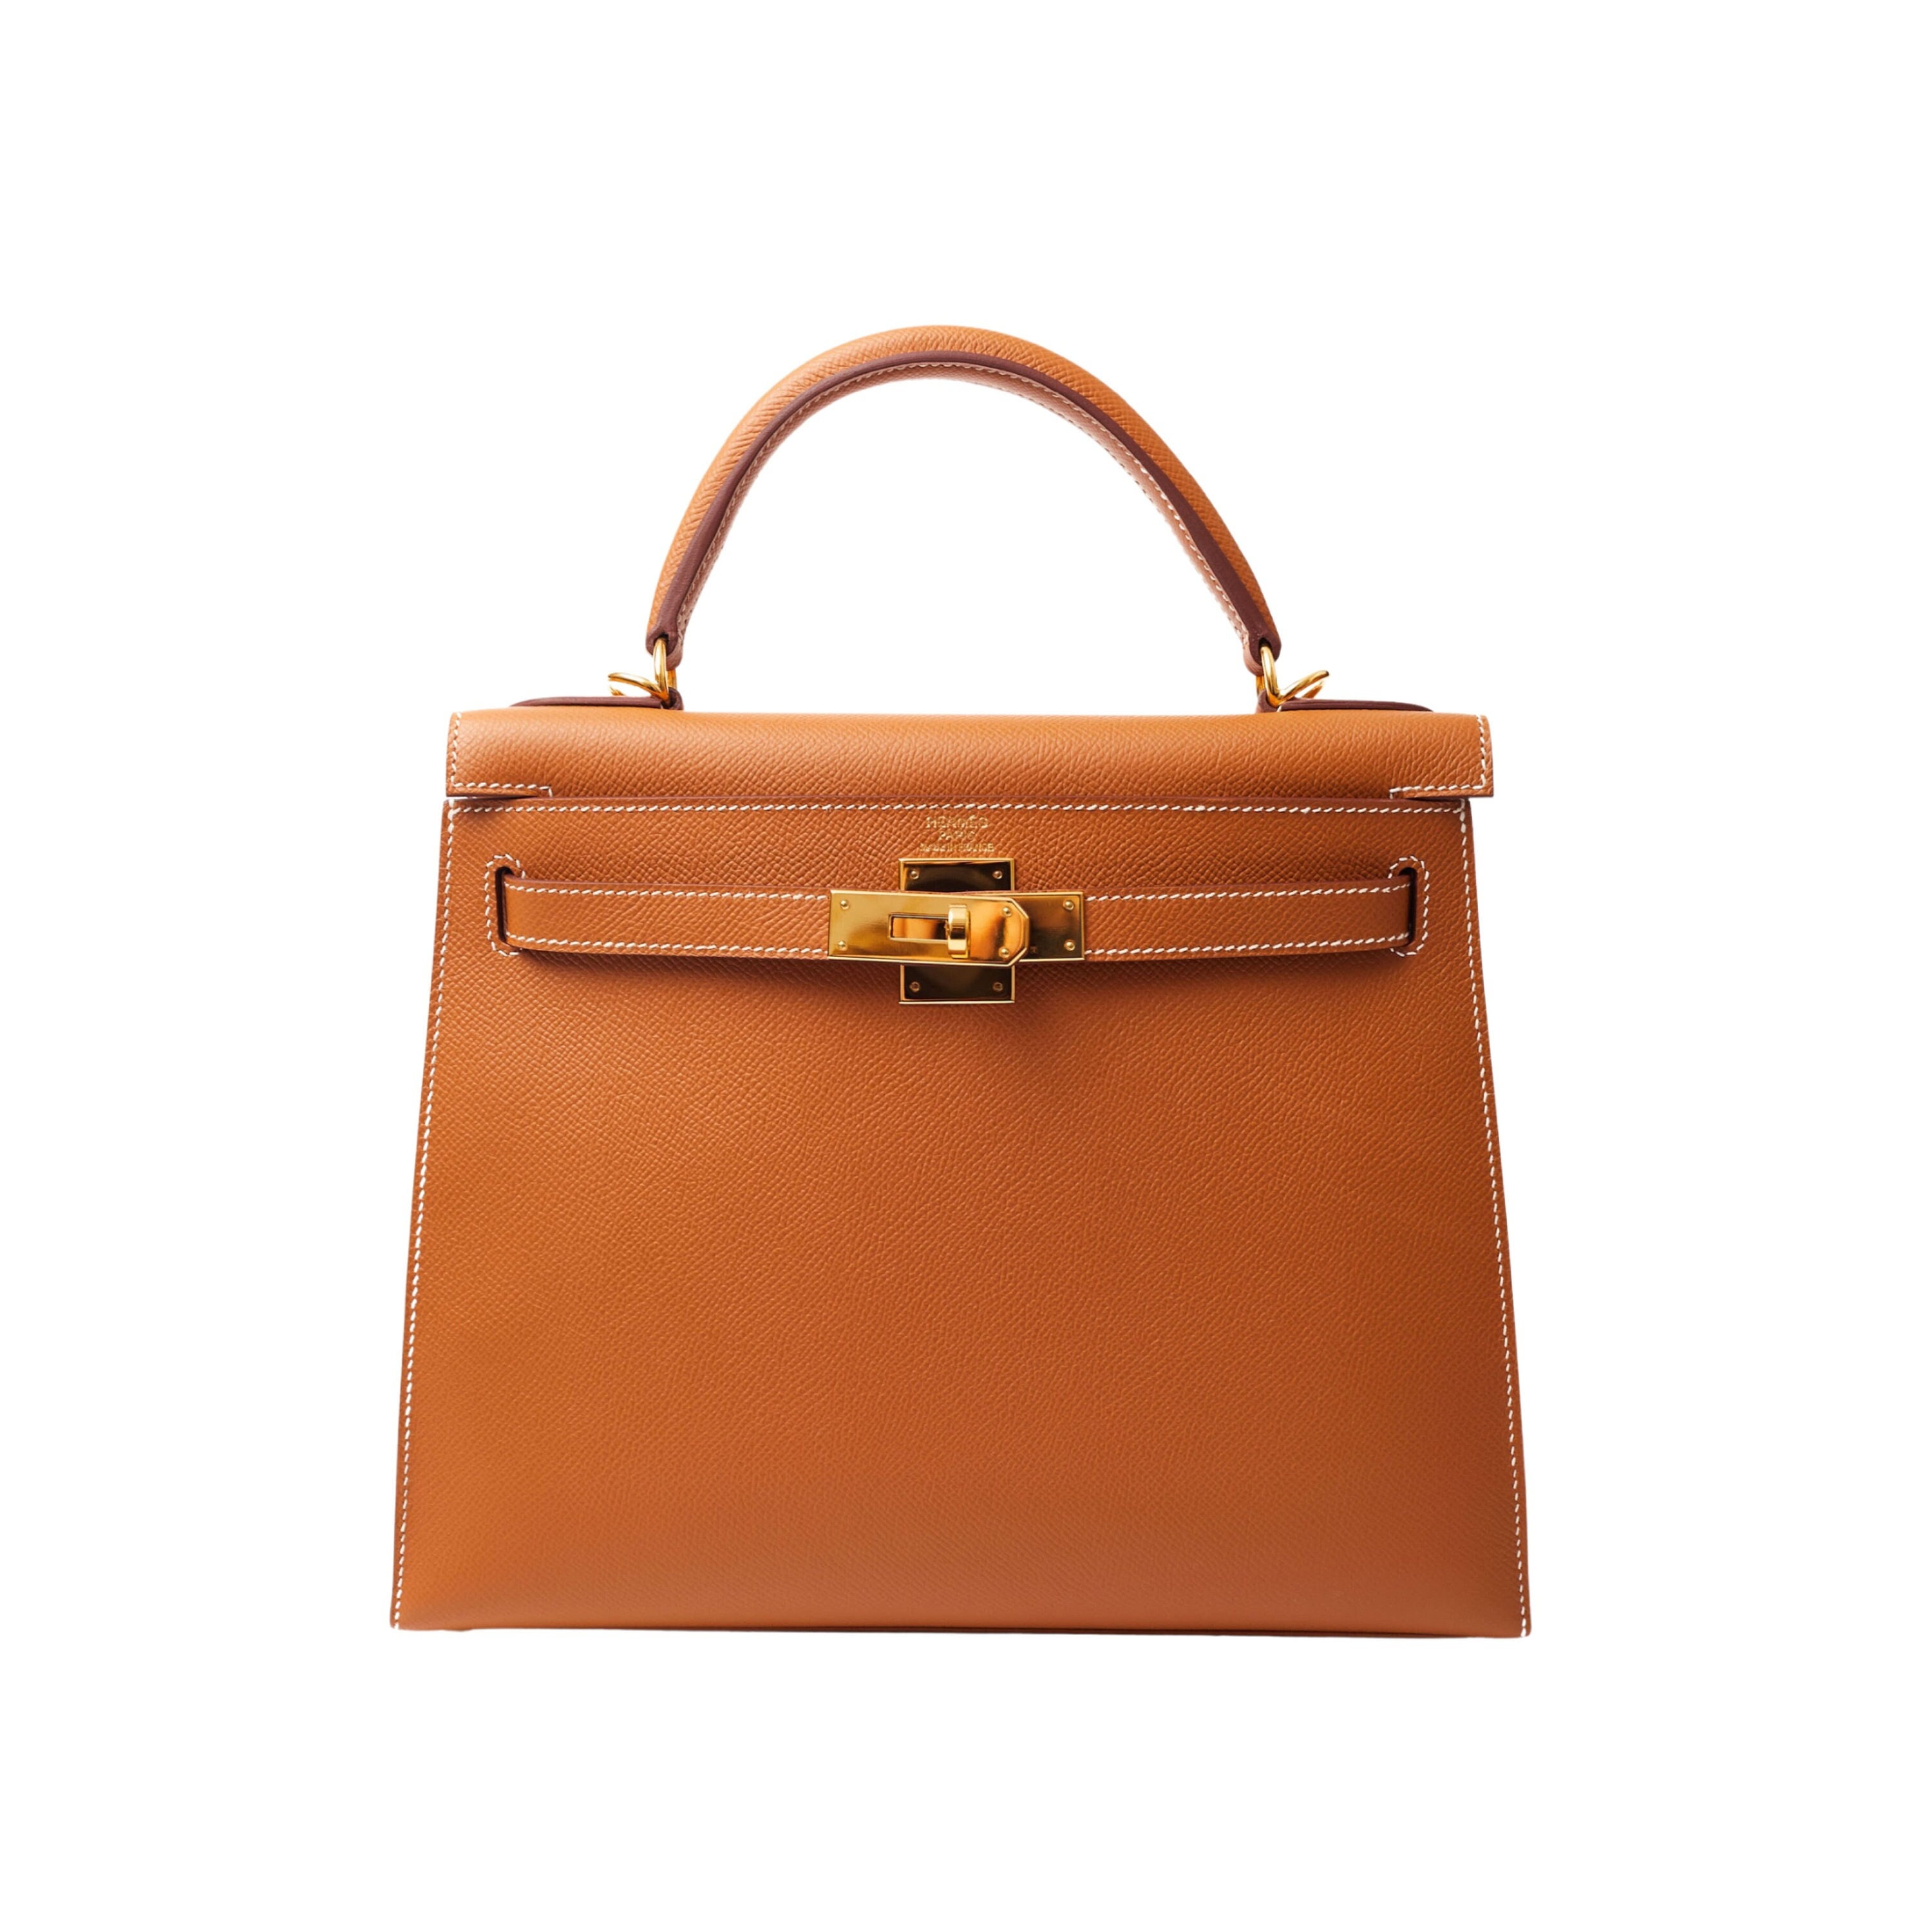 HERMES KELLY DEPECHES 25 UNBOXING WITH PRICE  Hermes kelly bag, multiple  ways to wear size worth it 